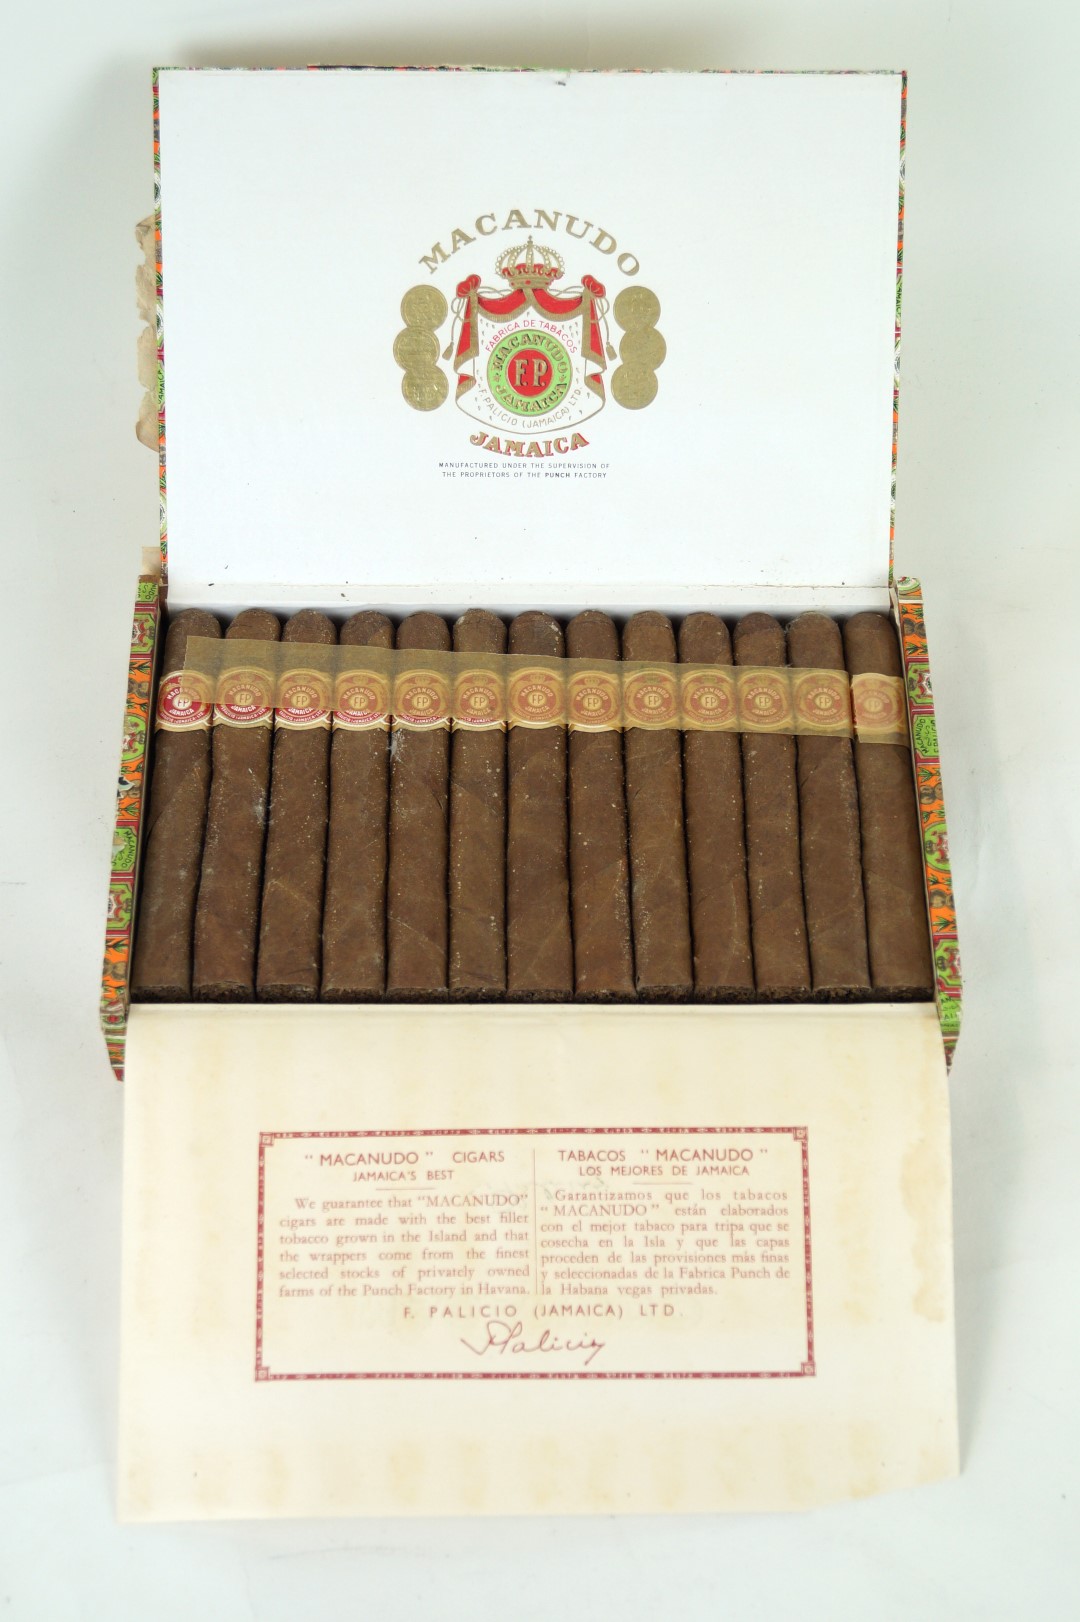 1 Box 25 Macanudo 'Churchills' Cigars from mid-late 1960's made in Jamaica and manufactured under